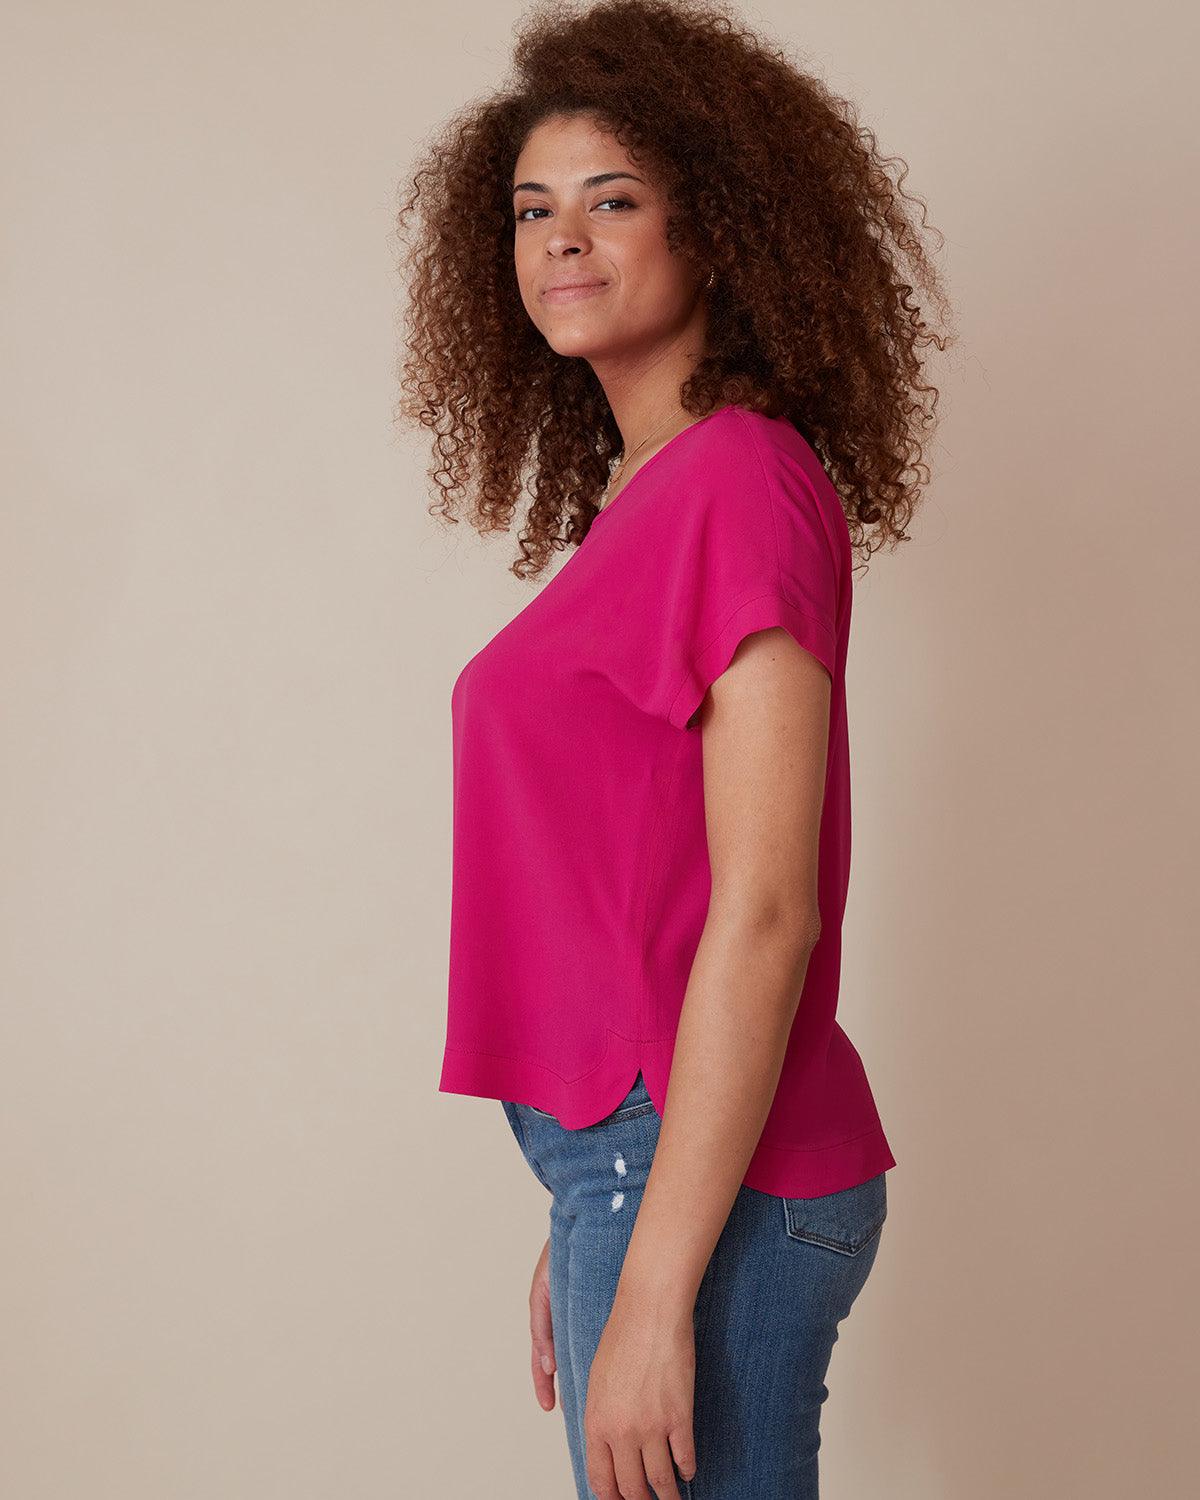 "#color_FUCHSIA|Cassandra is 5'11", wearing a size L